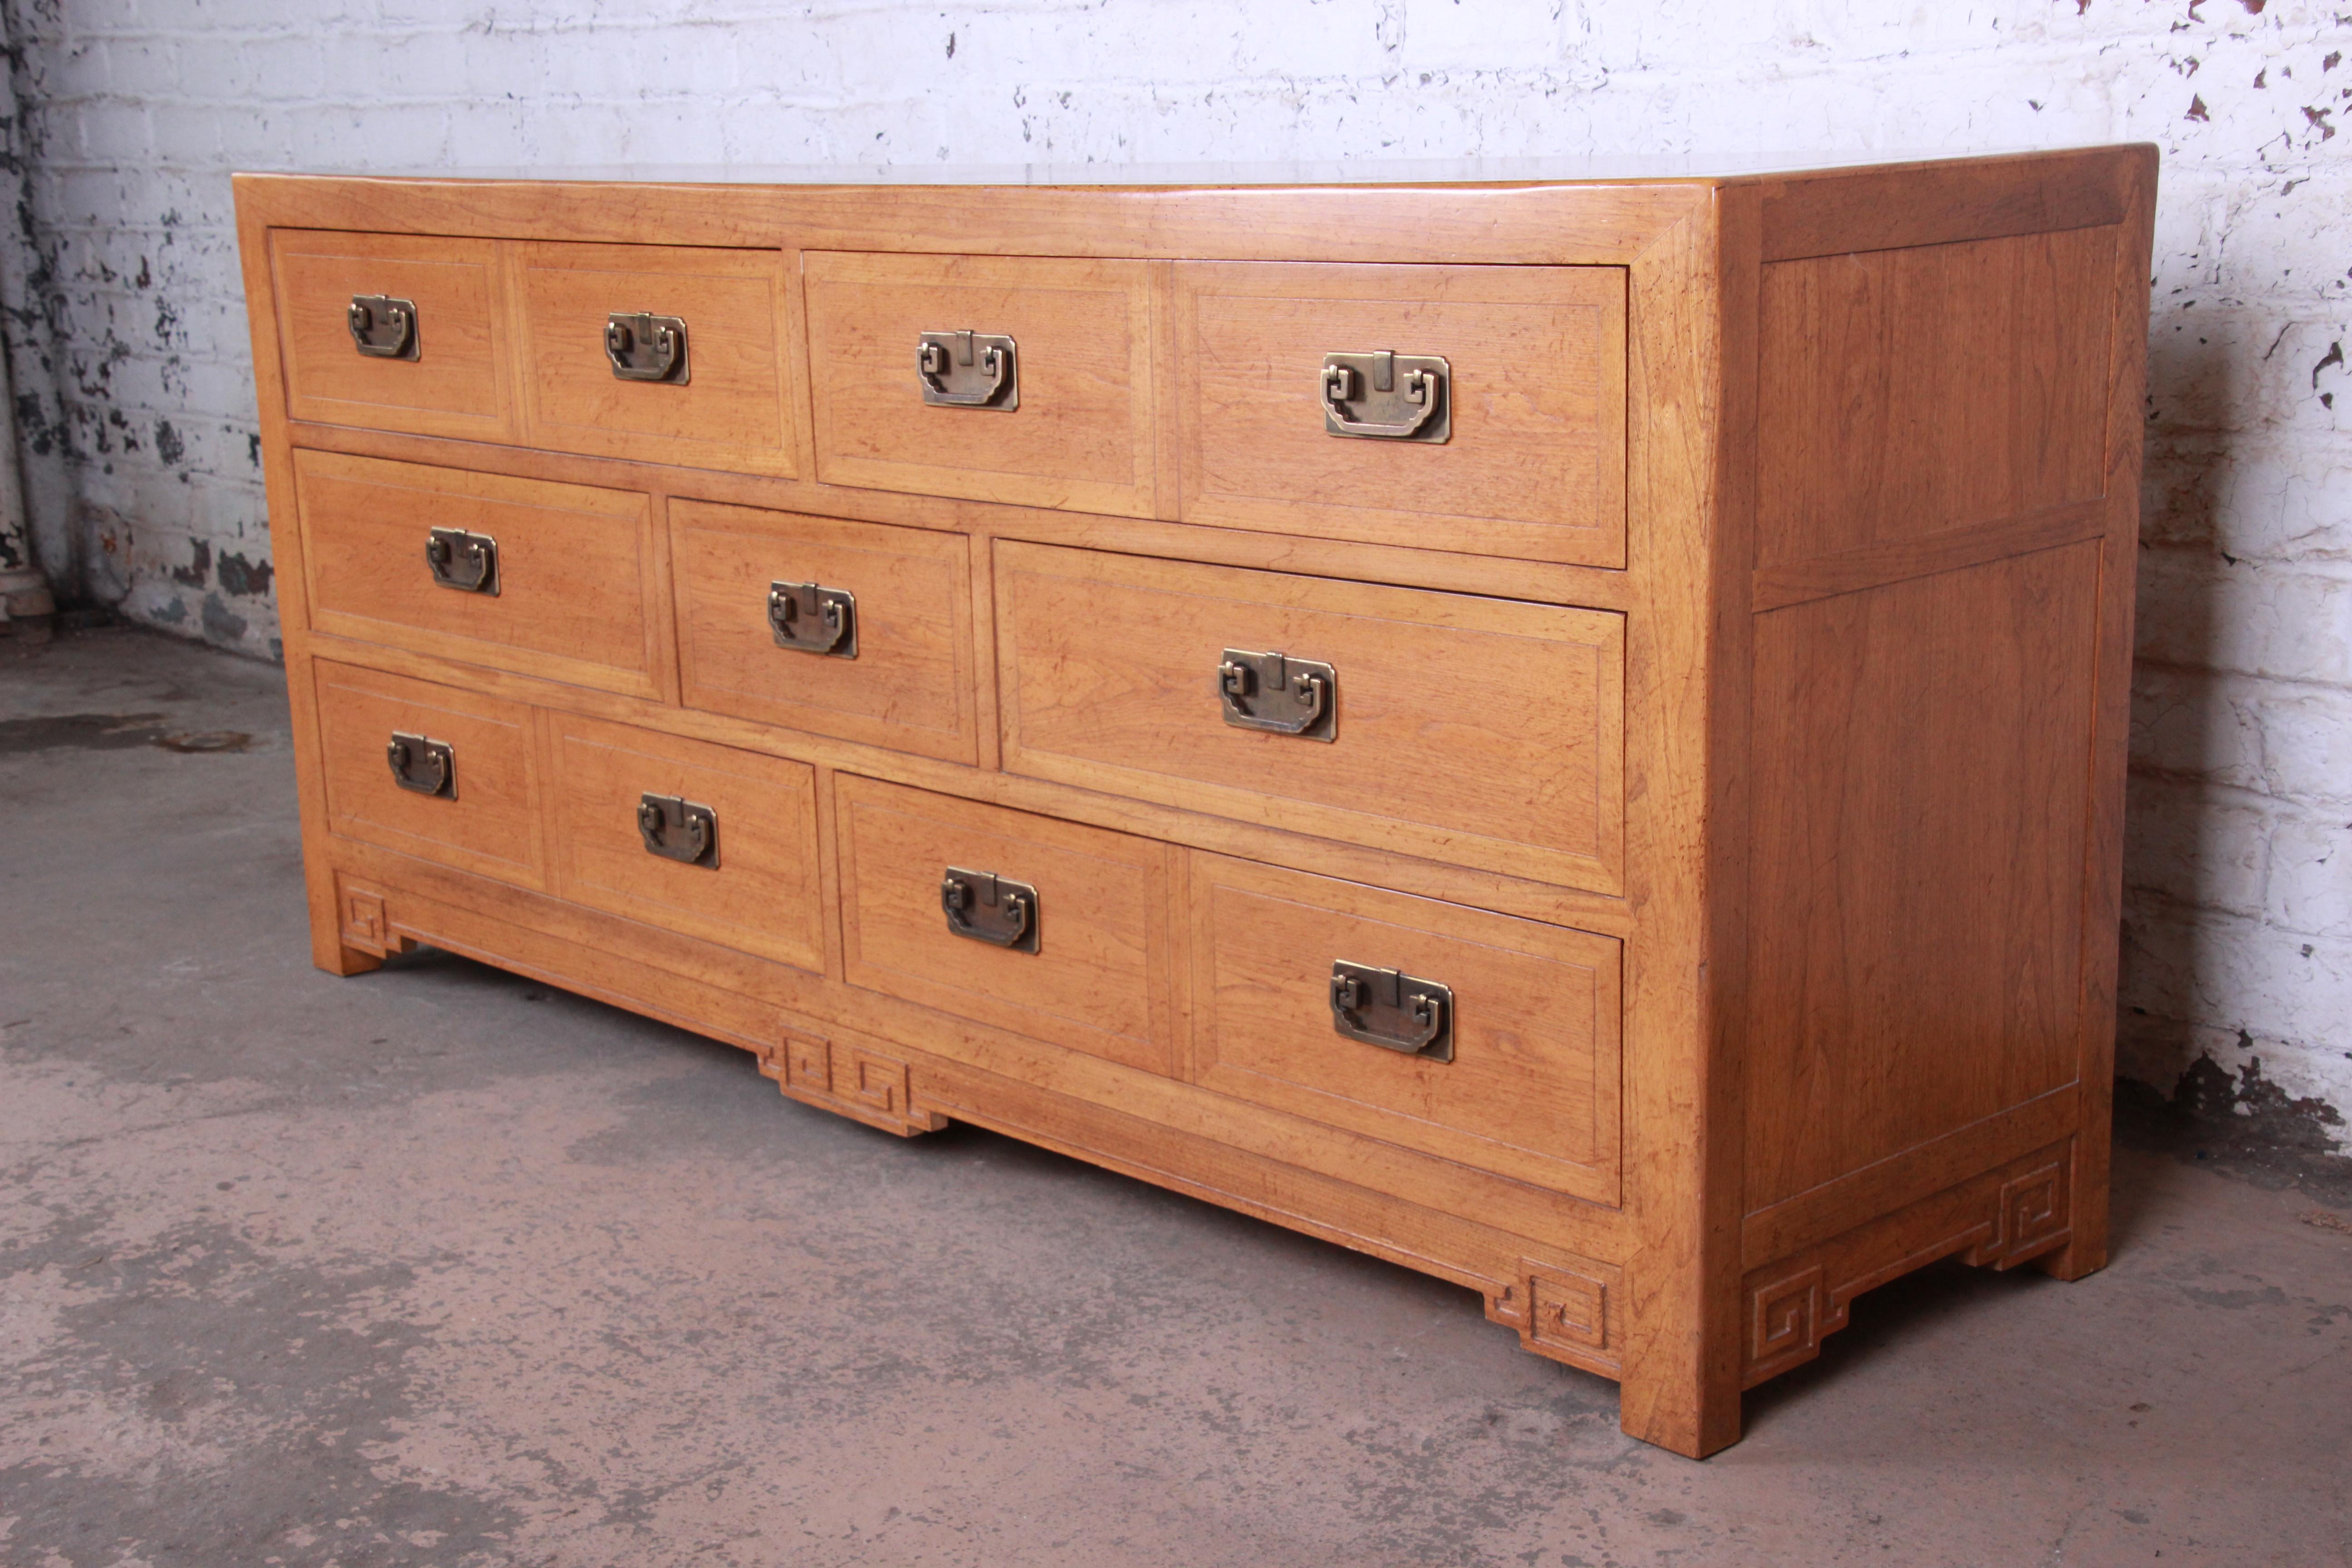 A very nice elm wood chinoiserie long dresser or credenza designed by Michael Taylor for his Far East collection for Baker Furniture. The dresser has beautiful Asian-inspired brass hardware and carved wood details. It offers ample room for storage,